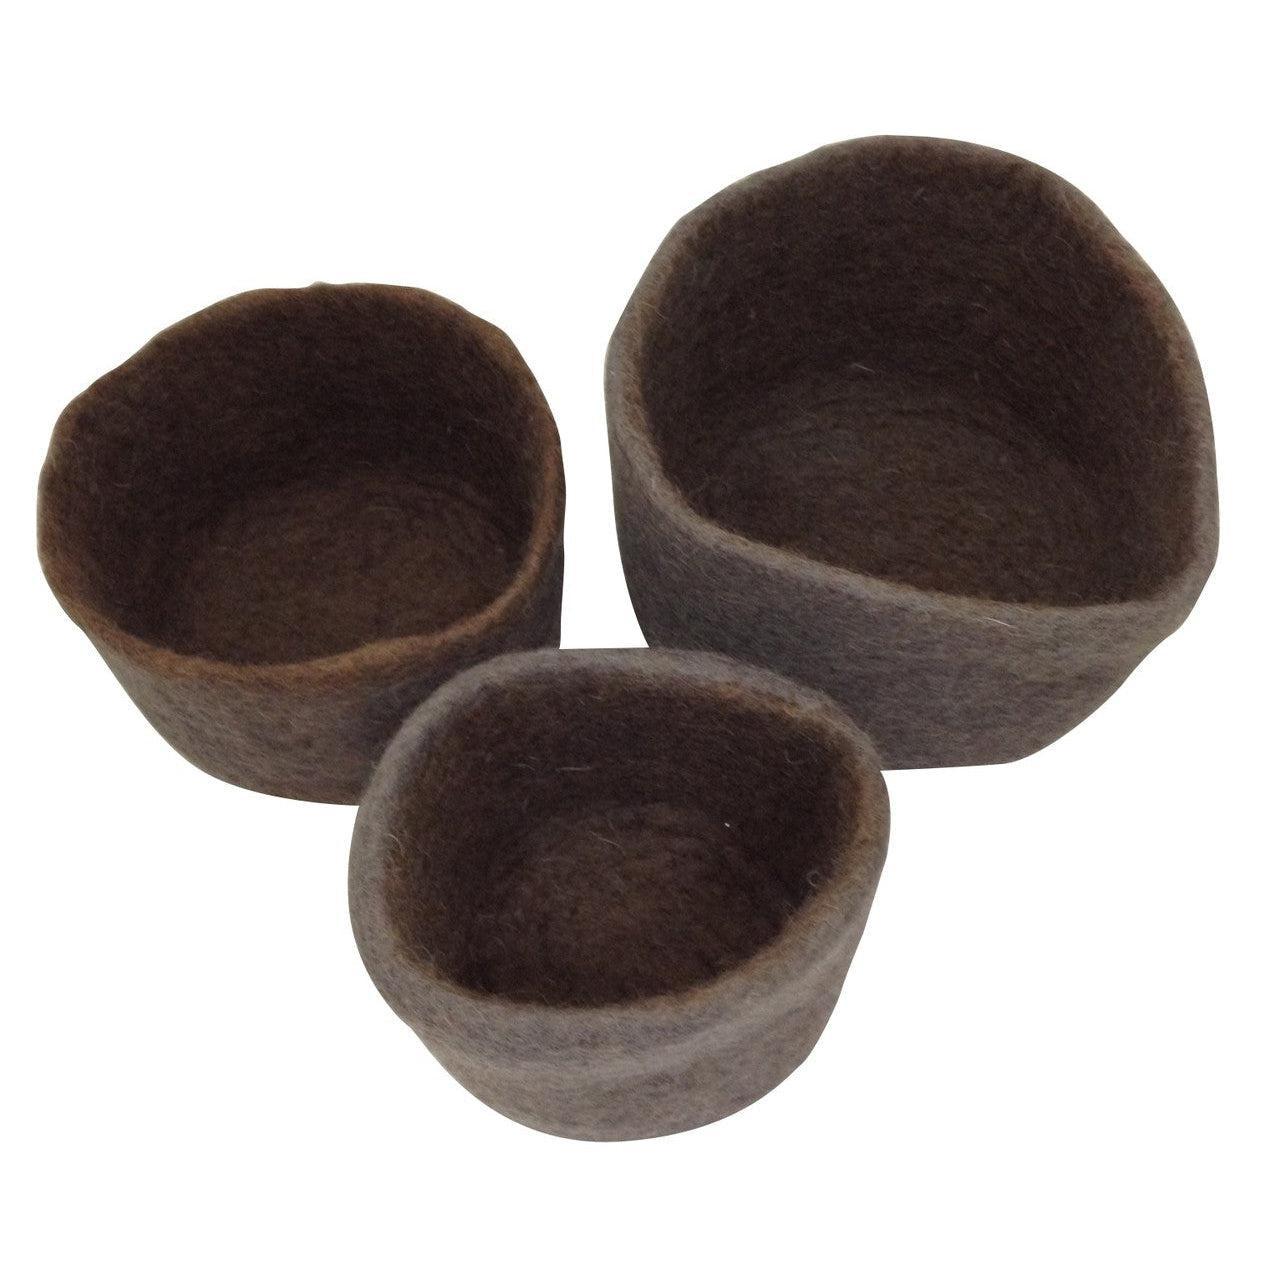 Papoose Nesting Bowls - Grey - 3 Pieces